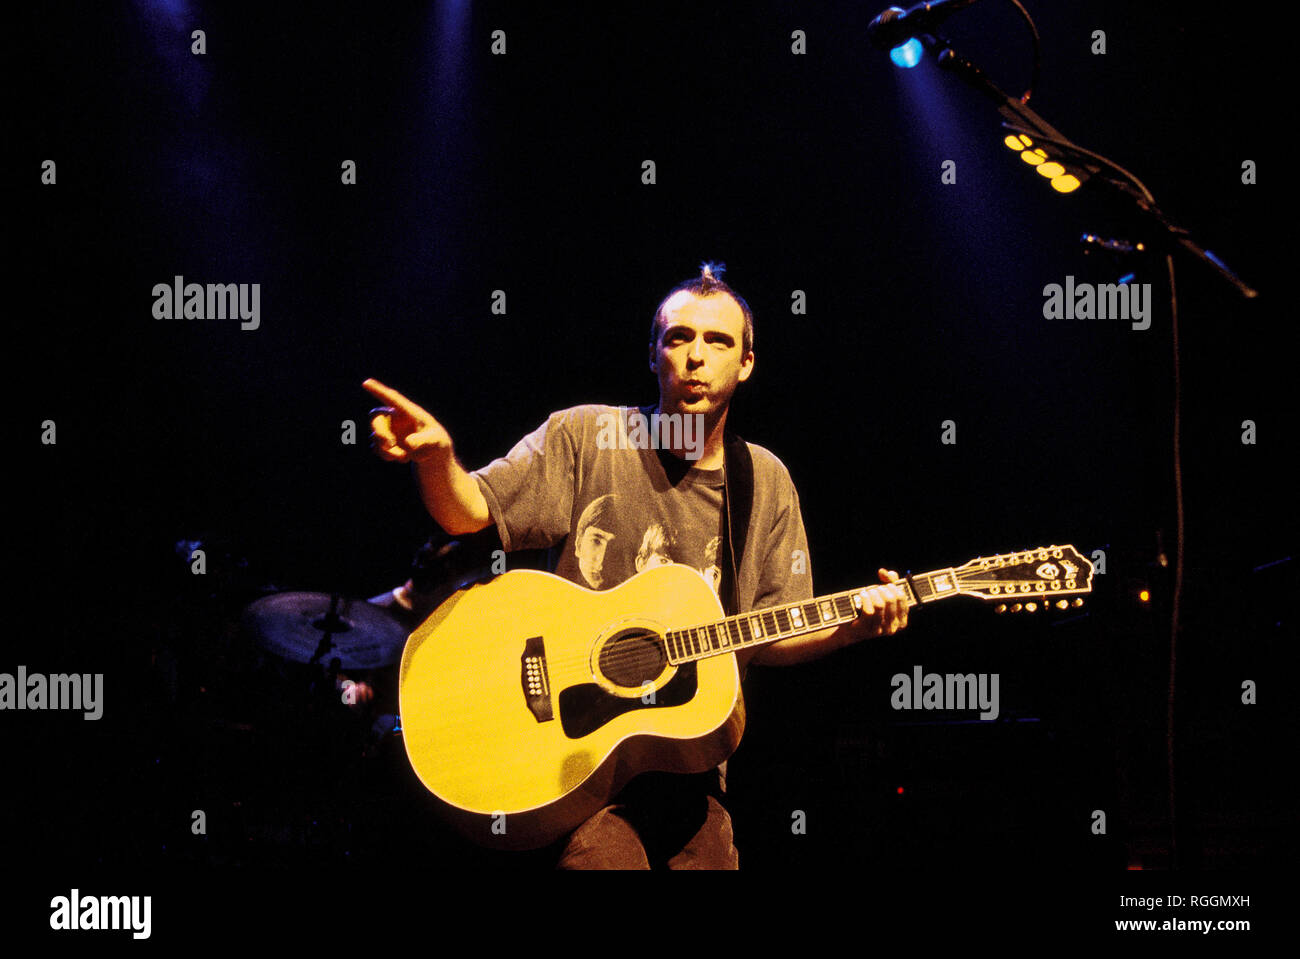 Fran Healey lead singer of the band Travis performing at the Kentish Town Forum on 16th September 2001, London, England, united Kingdom. Stock Photo